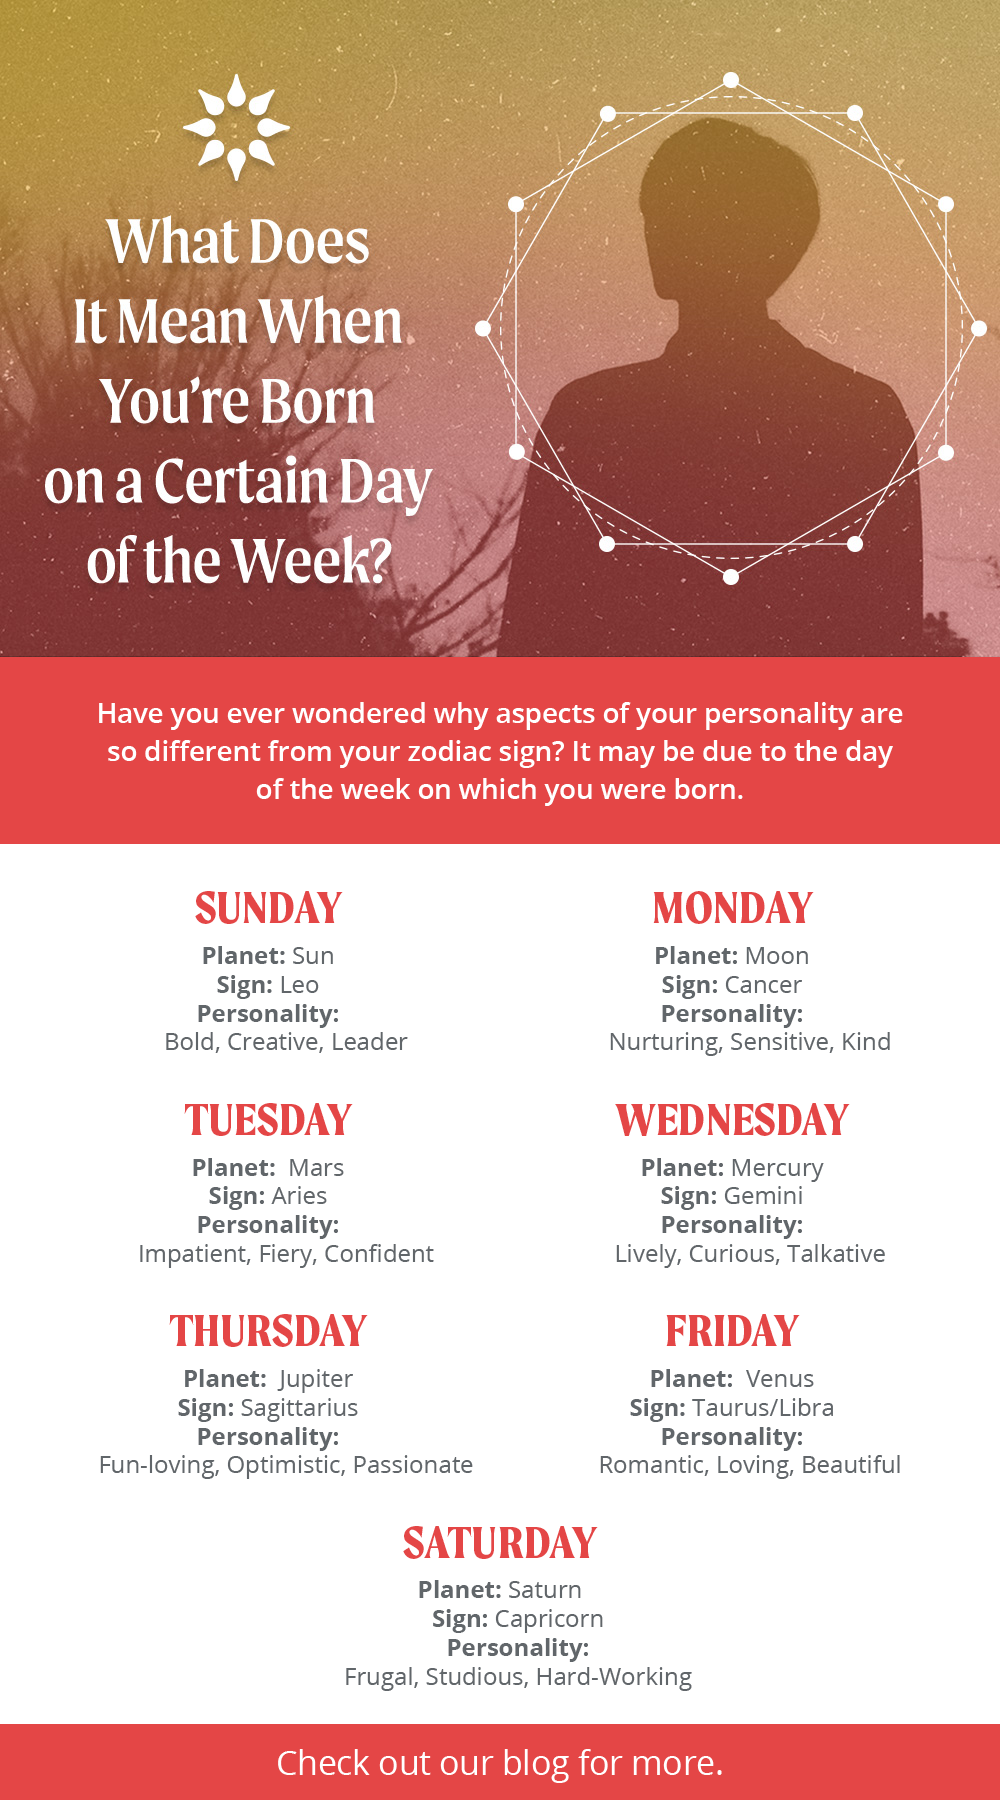 Day Of The Week Birth Meaning What Does The Day Of The Week You Were Born Mean California 